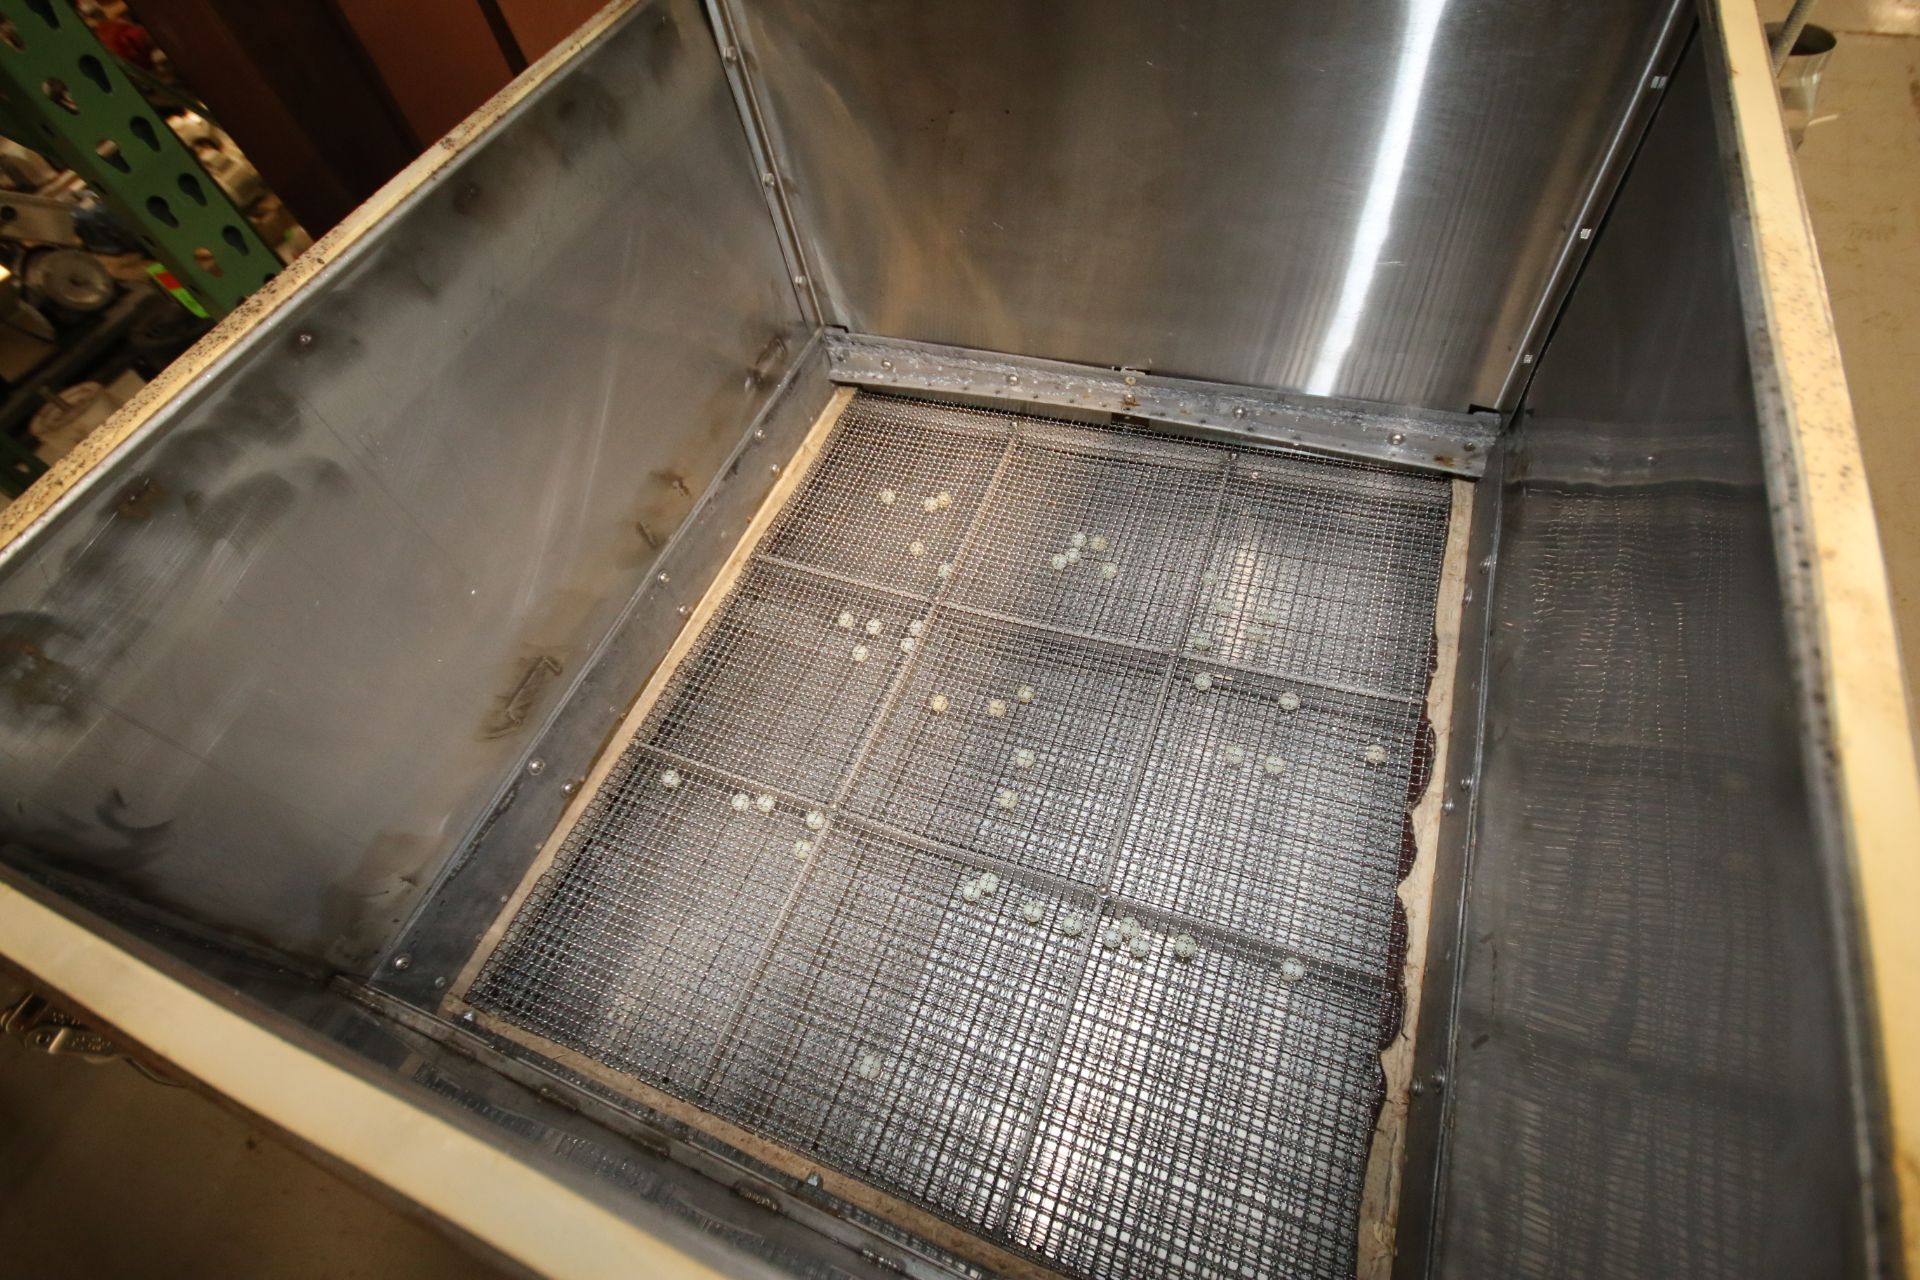 Ferrell - Ross 36" x 28" Gyratory Screen / Retangular Sifter, Size CS1, SN 4830, with 2 Section - Image 2 of 6